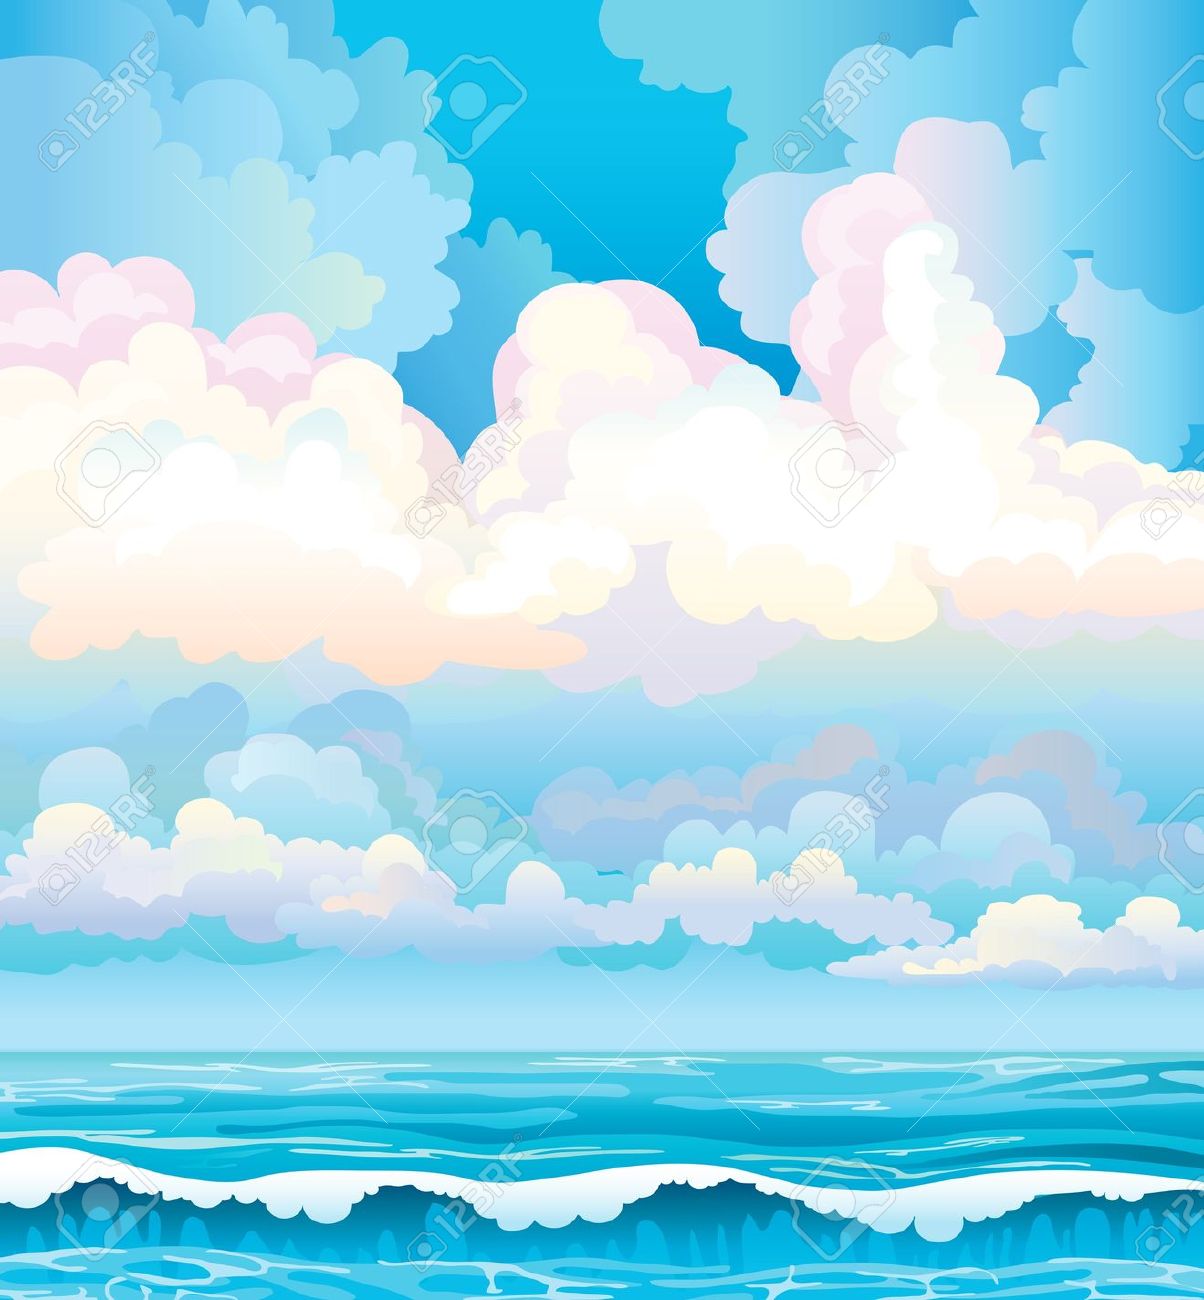 Sky and sea clipart.